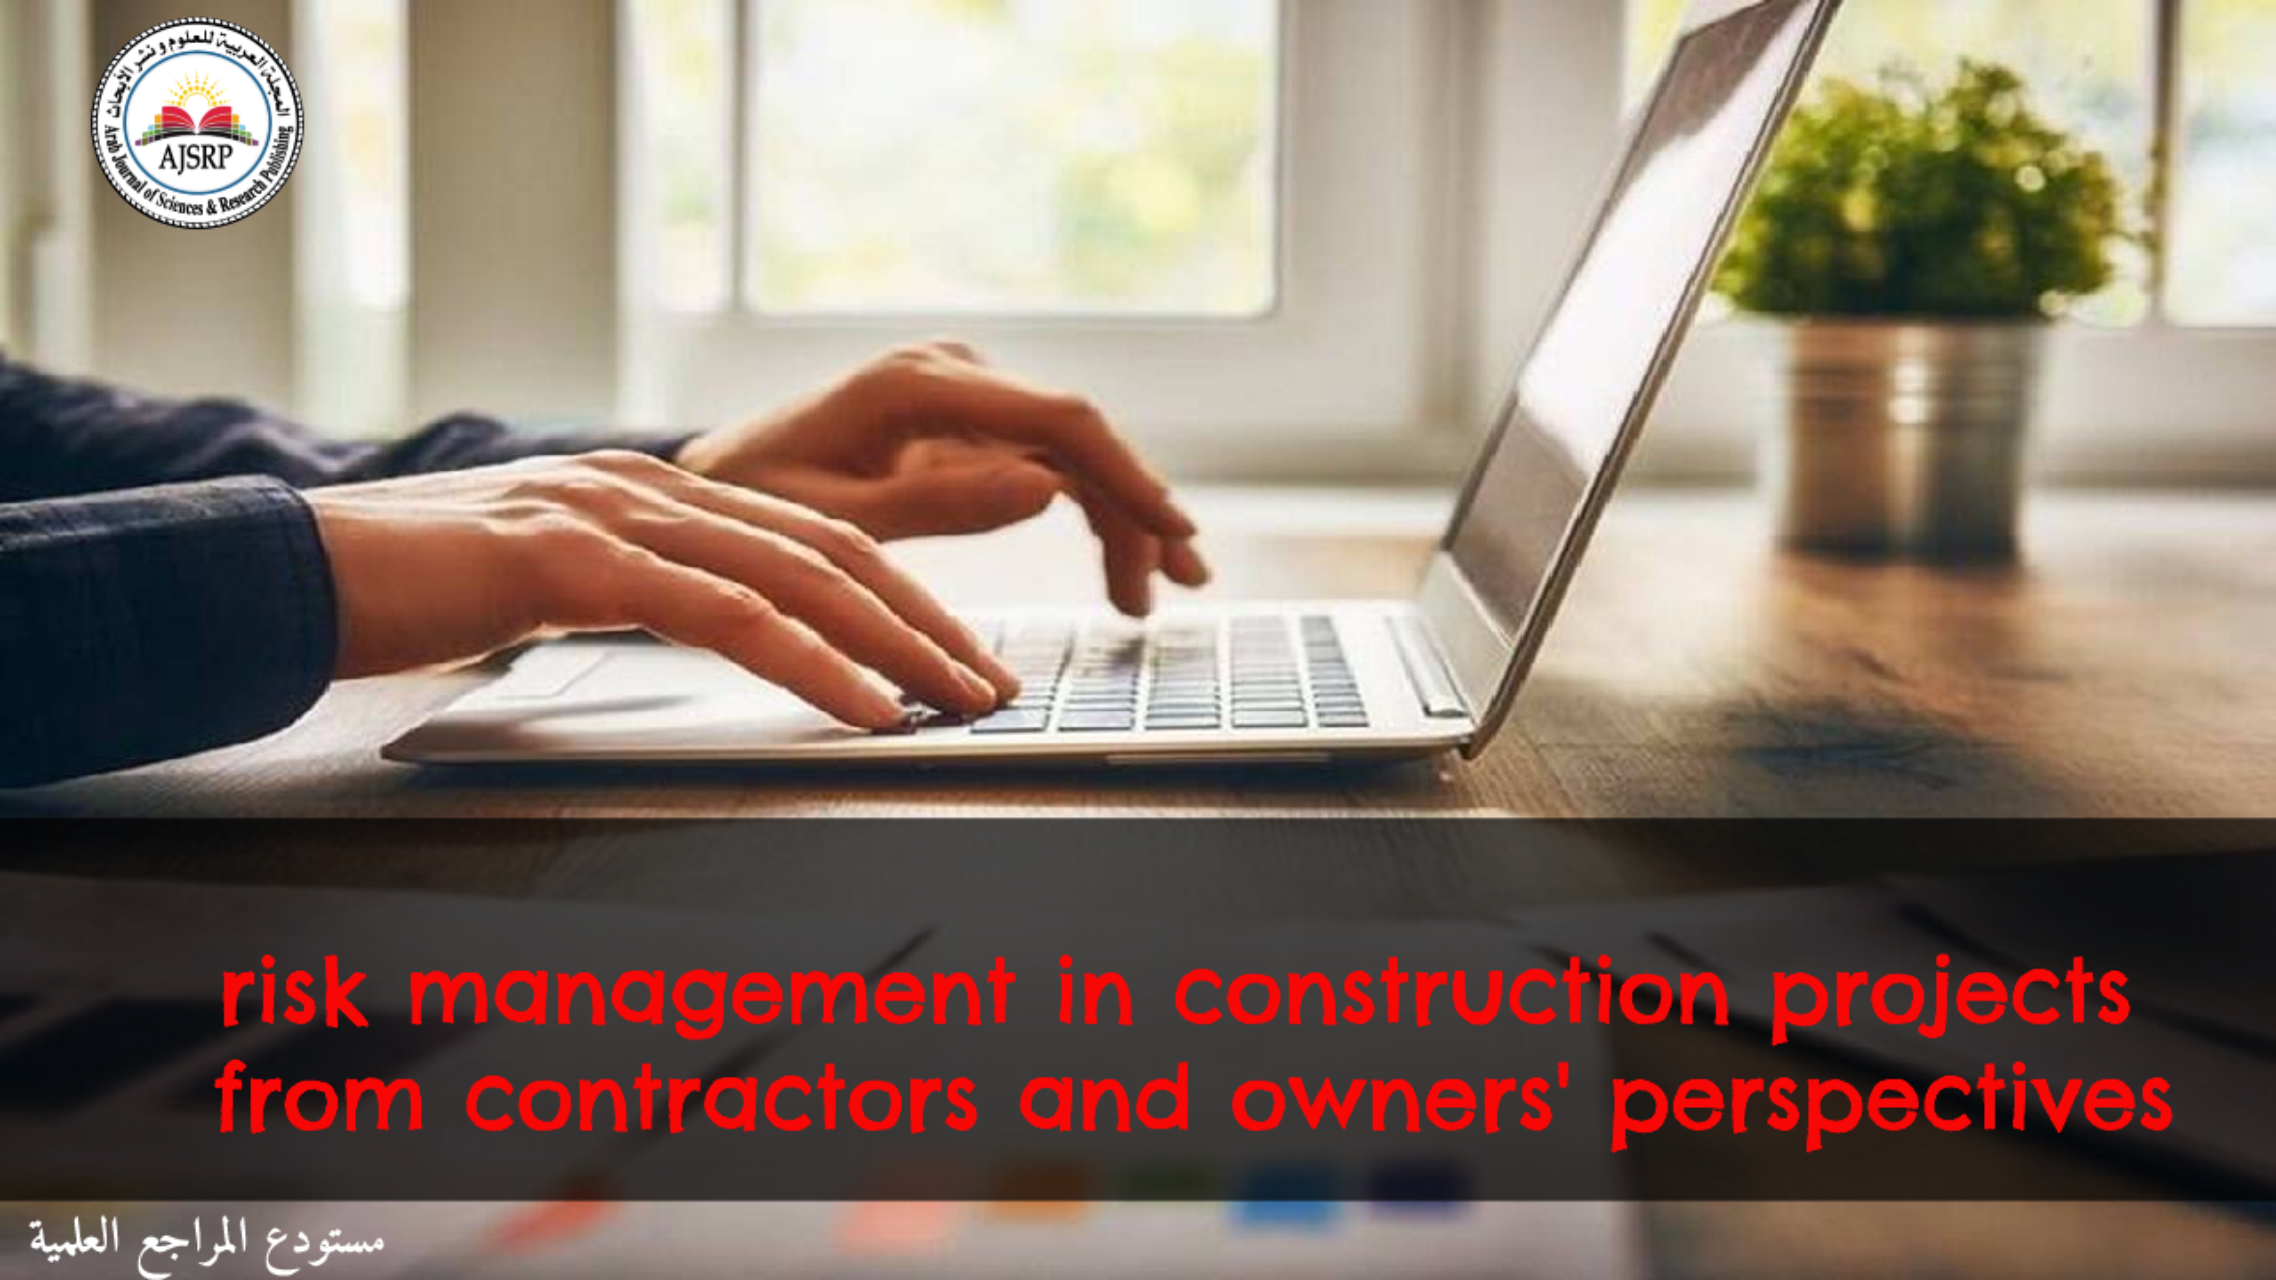 risk management in construction projects from contractors and owners' perspectives